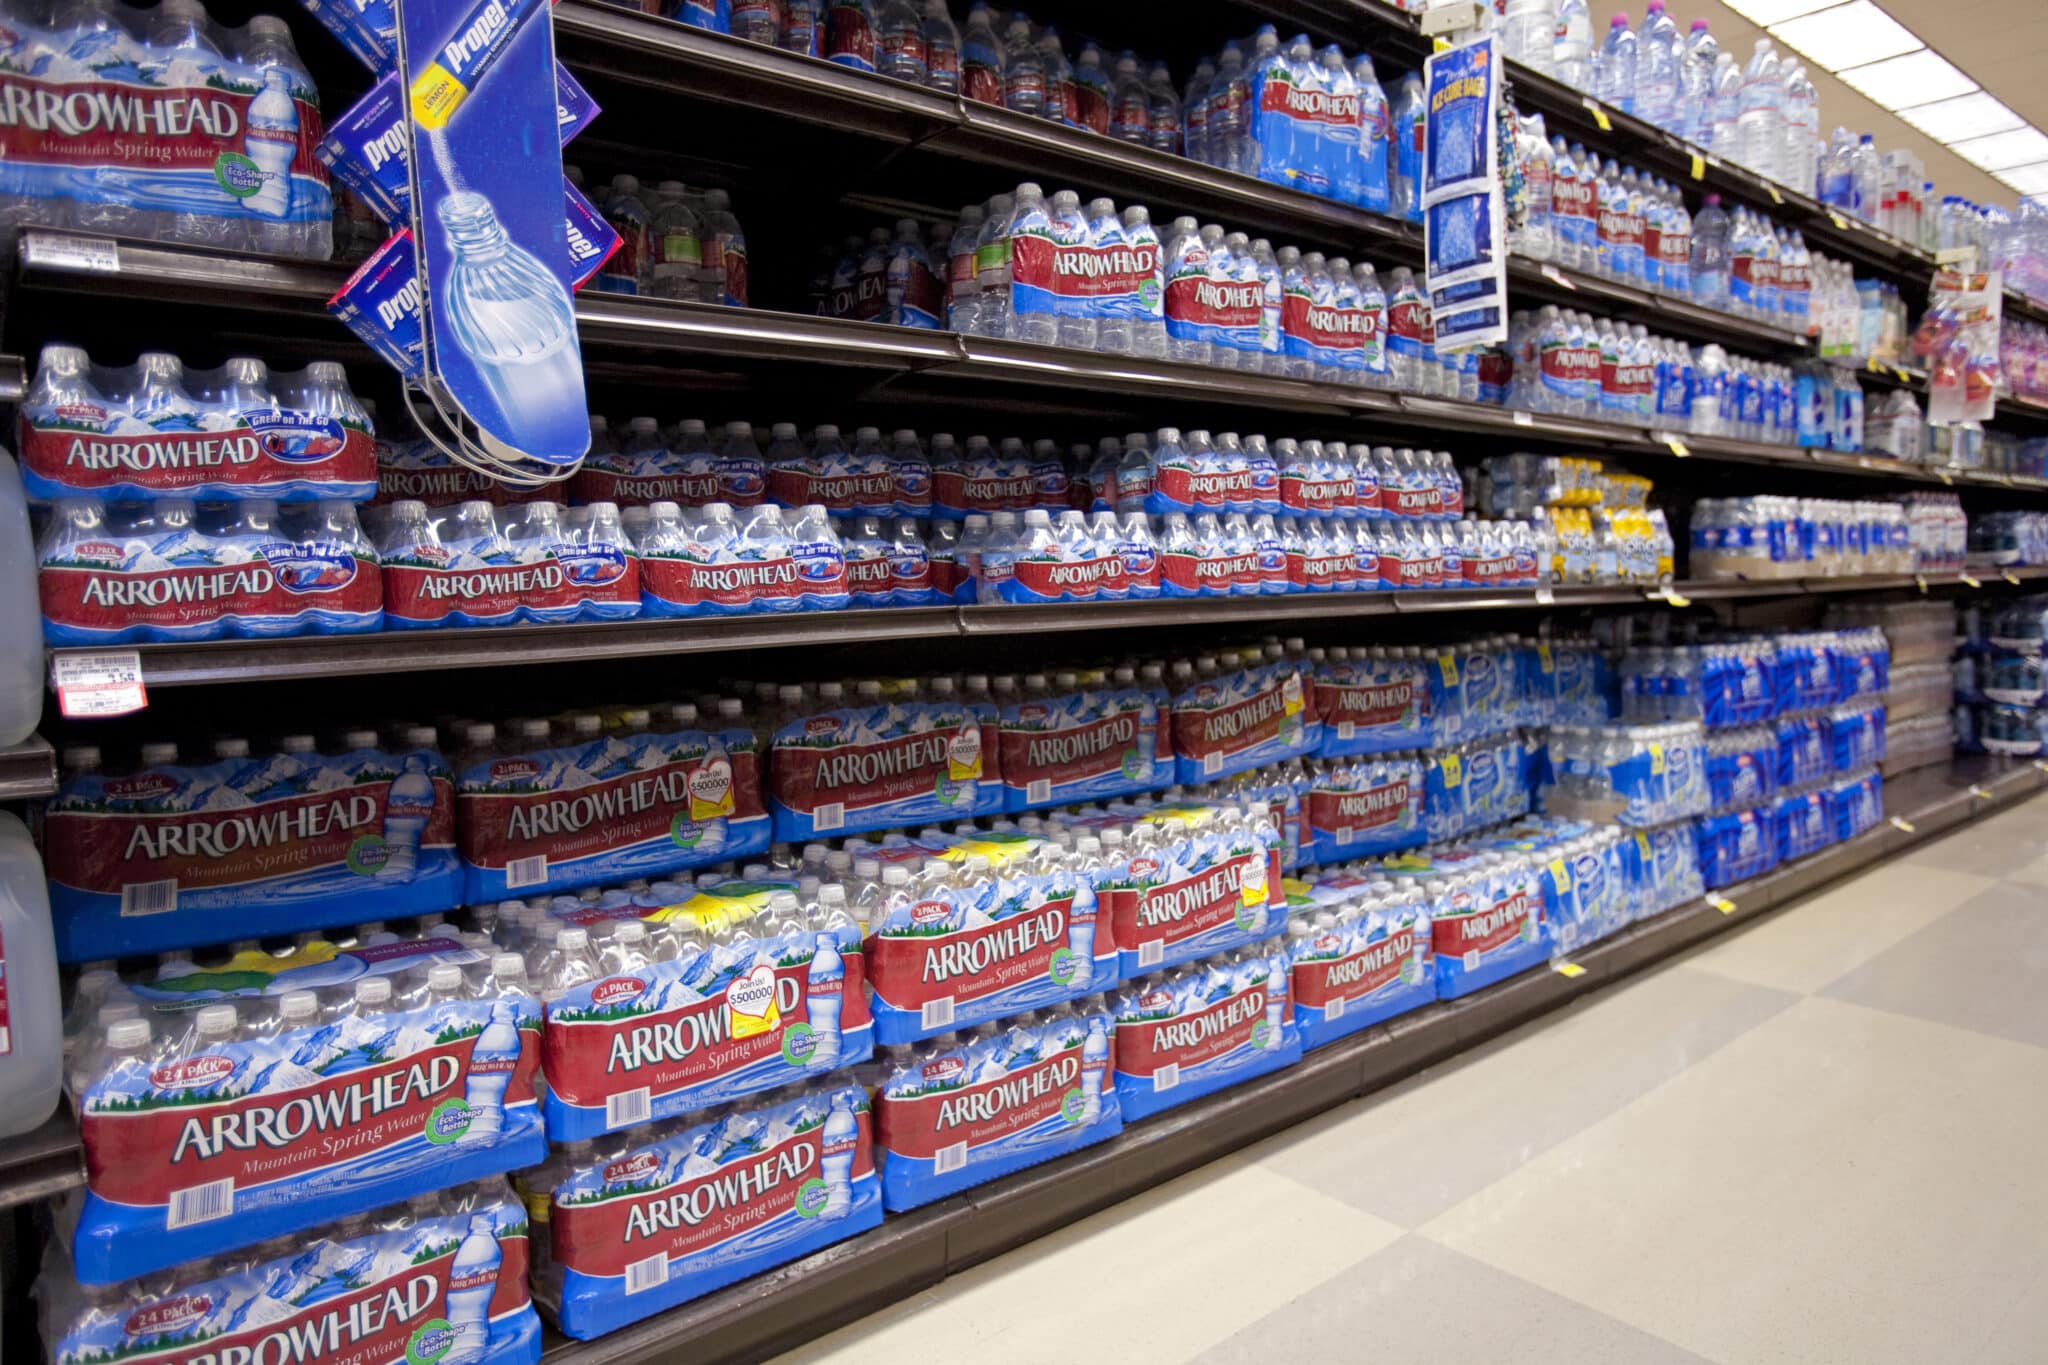 Plastic Water bottles on Supermarket shelf. (Photo by: Education Images/Citizens of the Planet/Universal Images Group via Getty Images)